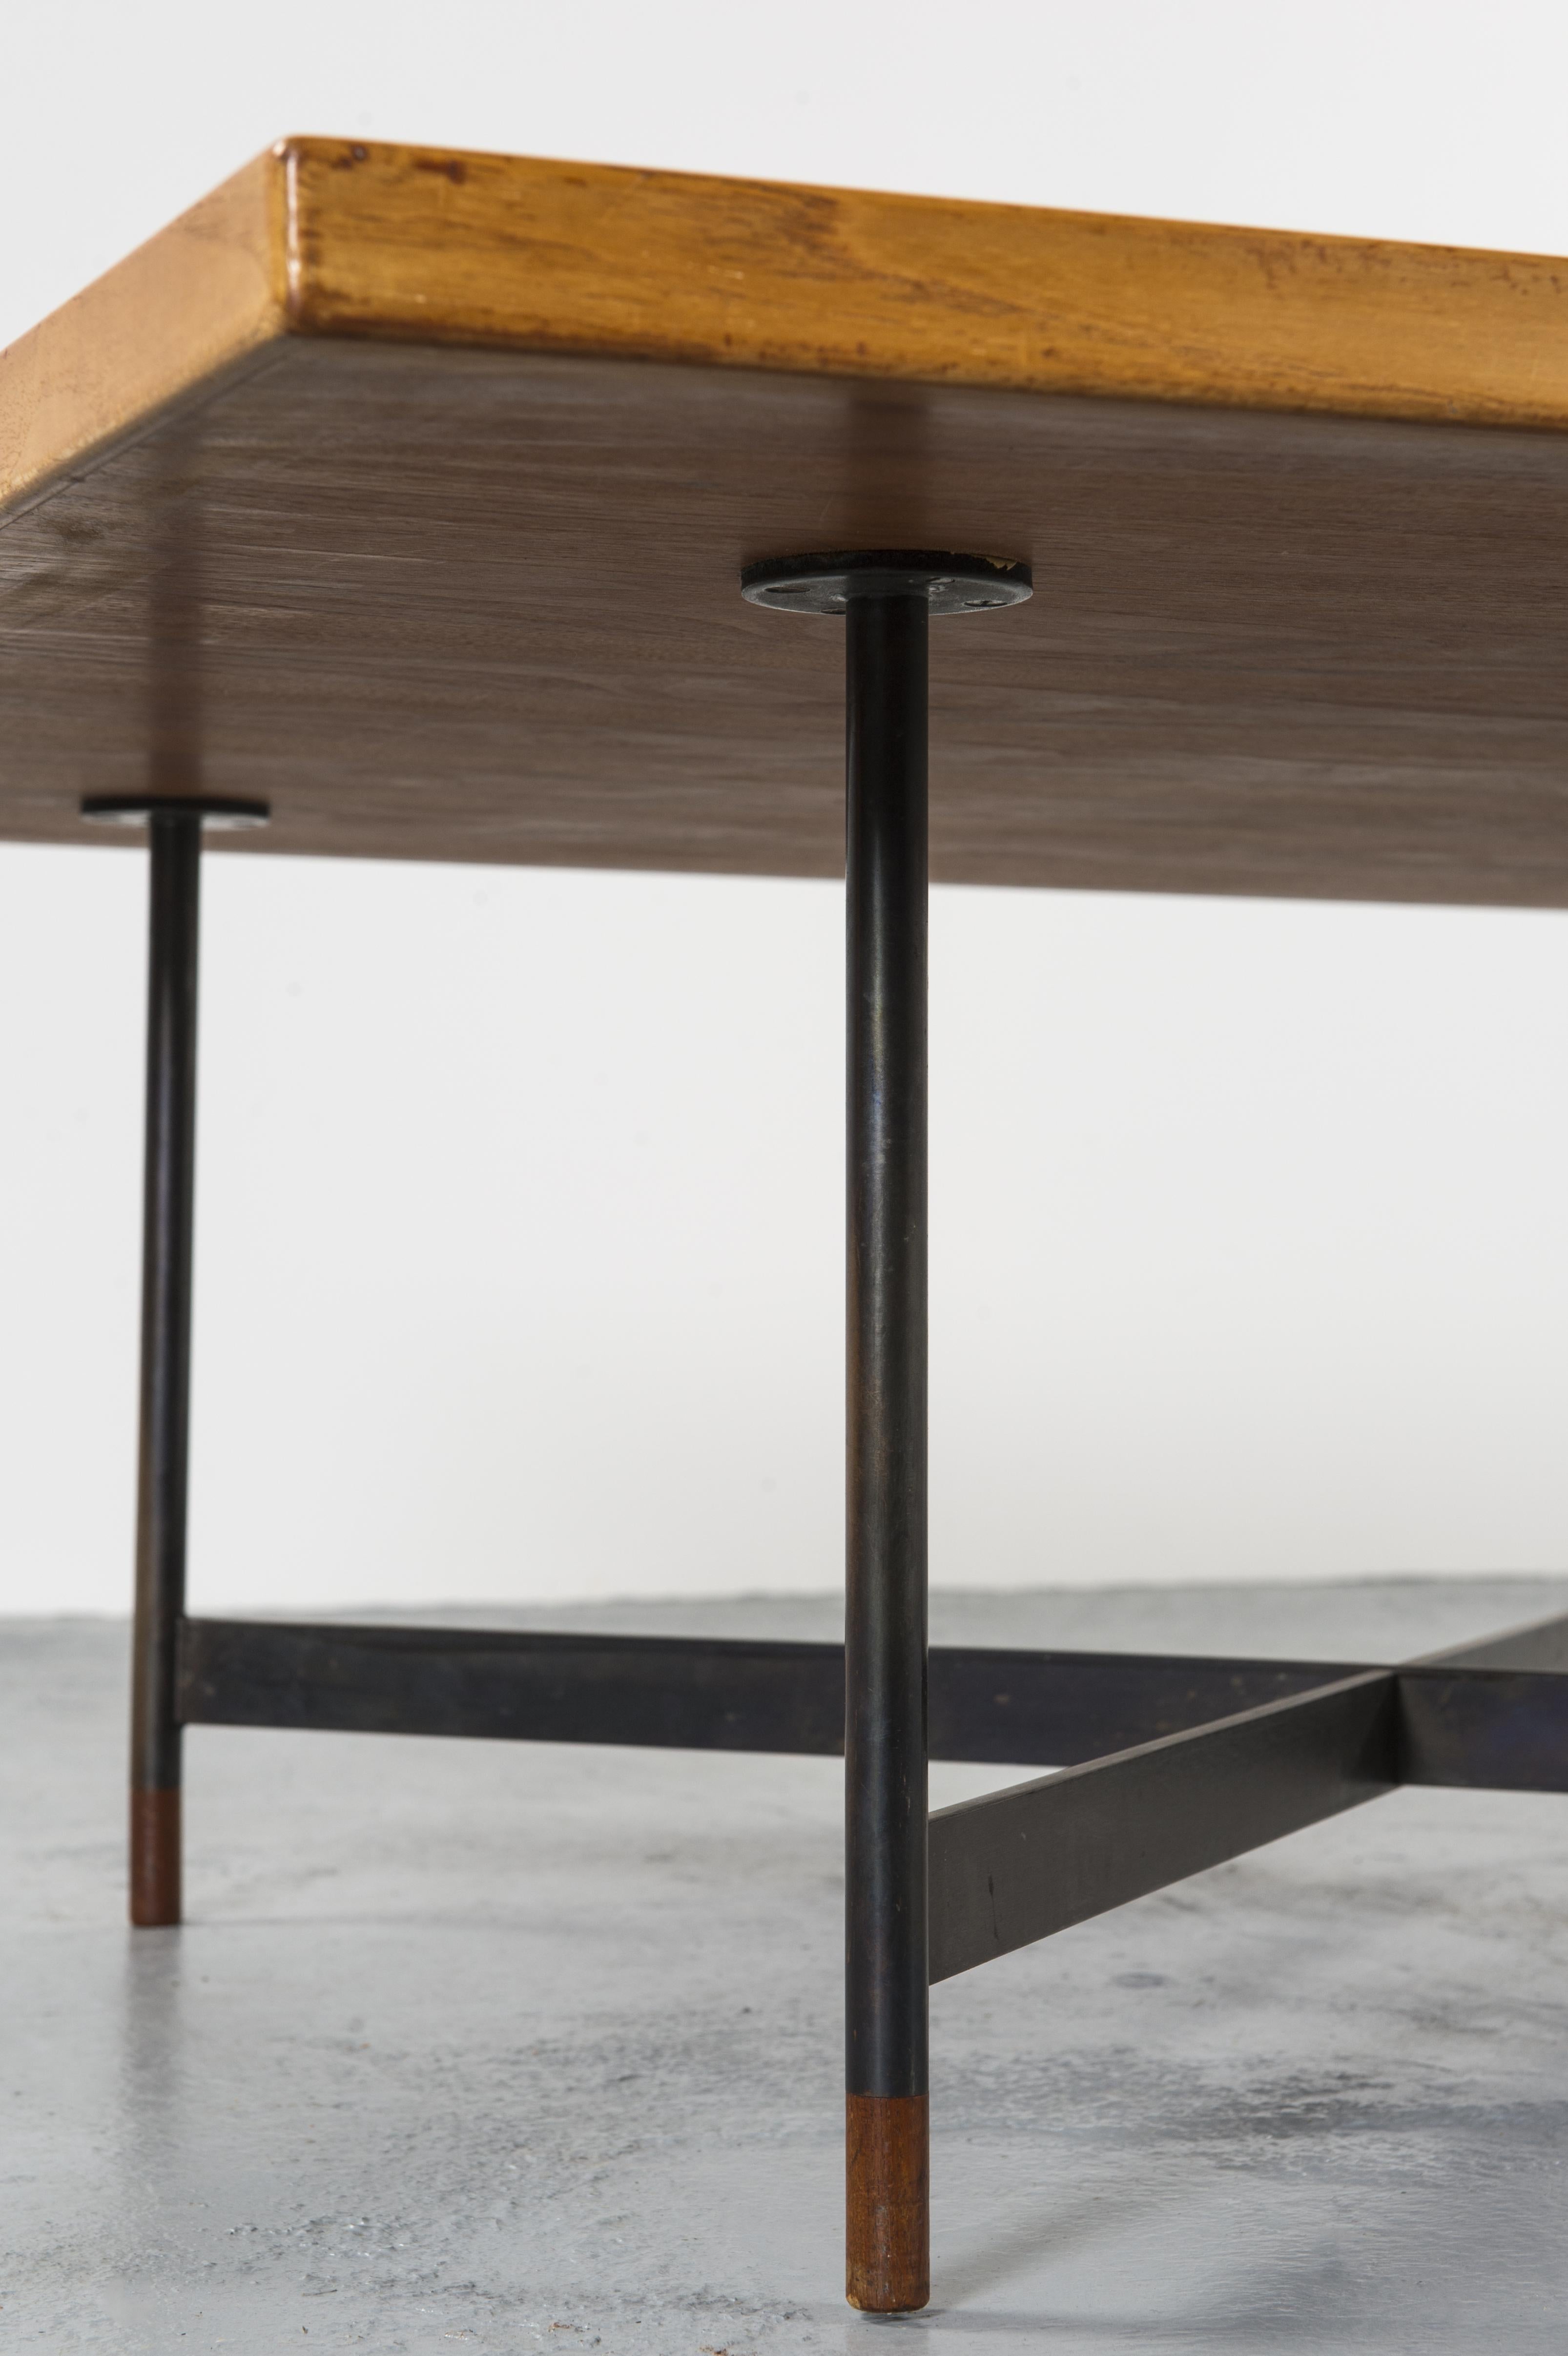 Square coffee table model FJ57 by Finn Juhl, Vodder Edition, 1957, Denmark 

Limited edition coffee table FJ 57 for Niels VODDER, 1950s. The teak wood top rests on steel X-base anodized metal frame with teak 